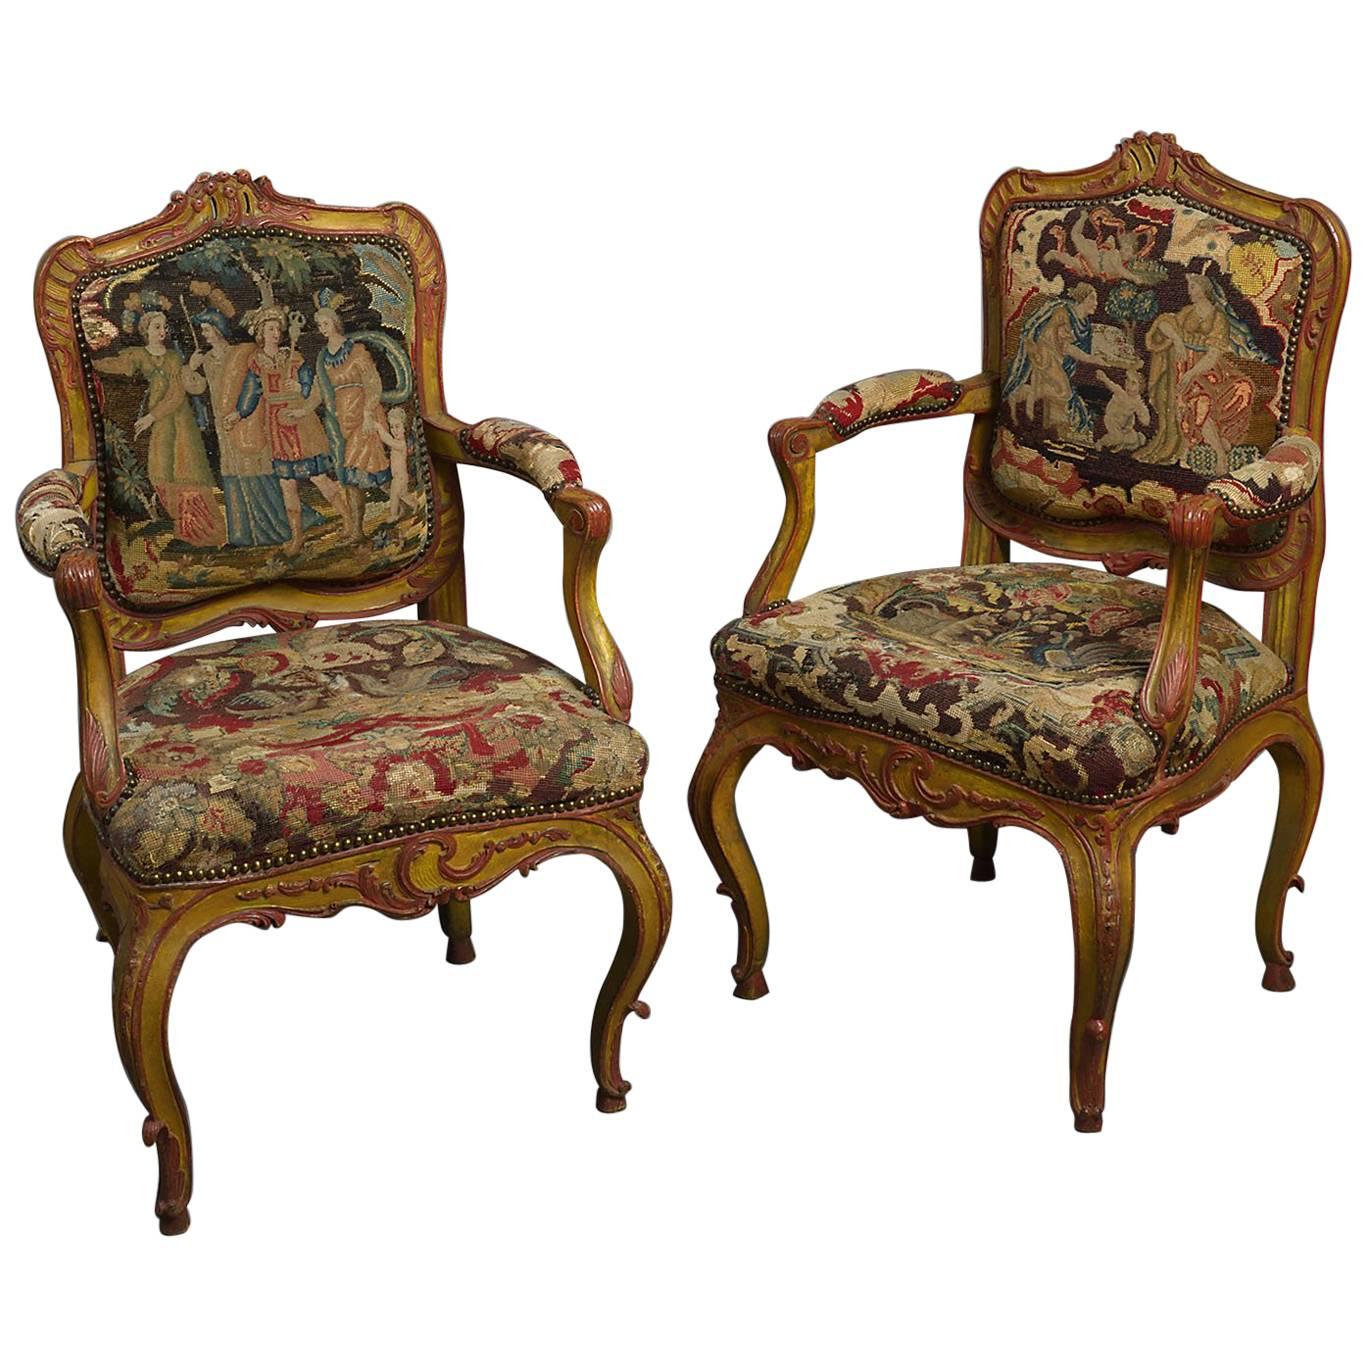 Pair of 18th Century Bavarian Painted Needlework Armchairs For Sale